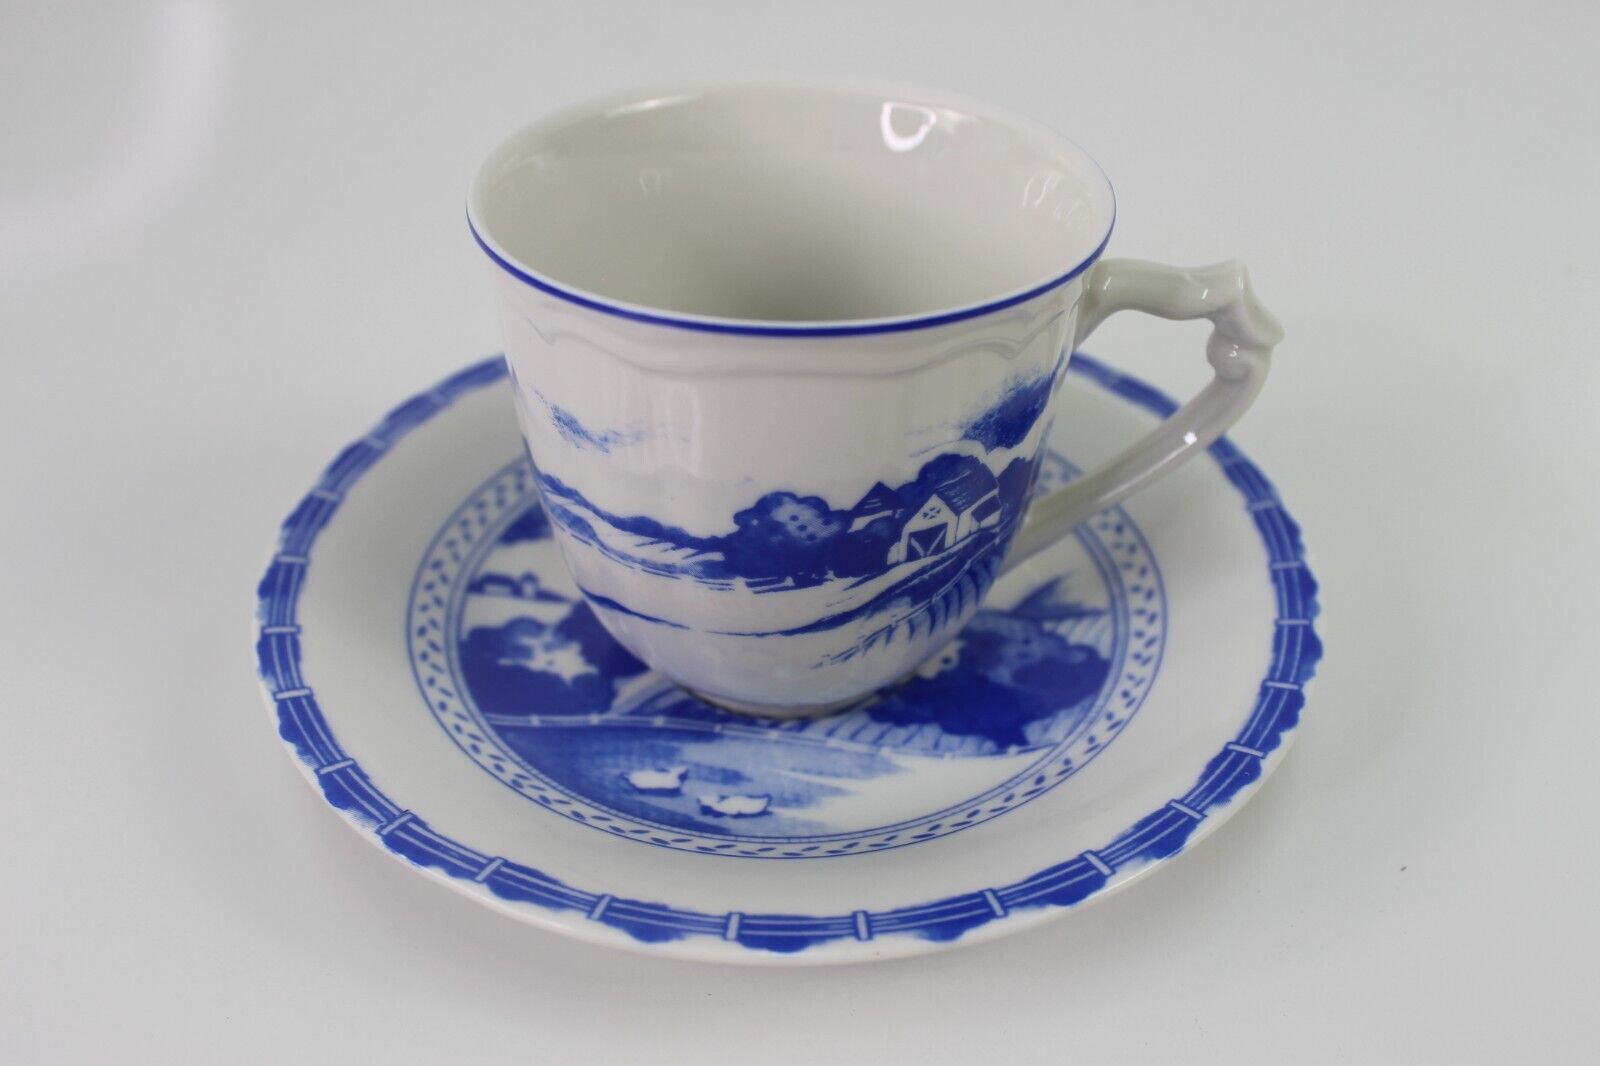 Teleflora Delft Style Blue Cup & Saucer Demitasse Hand  Painted Windmill Flowers